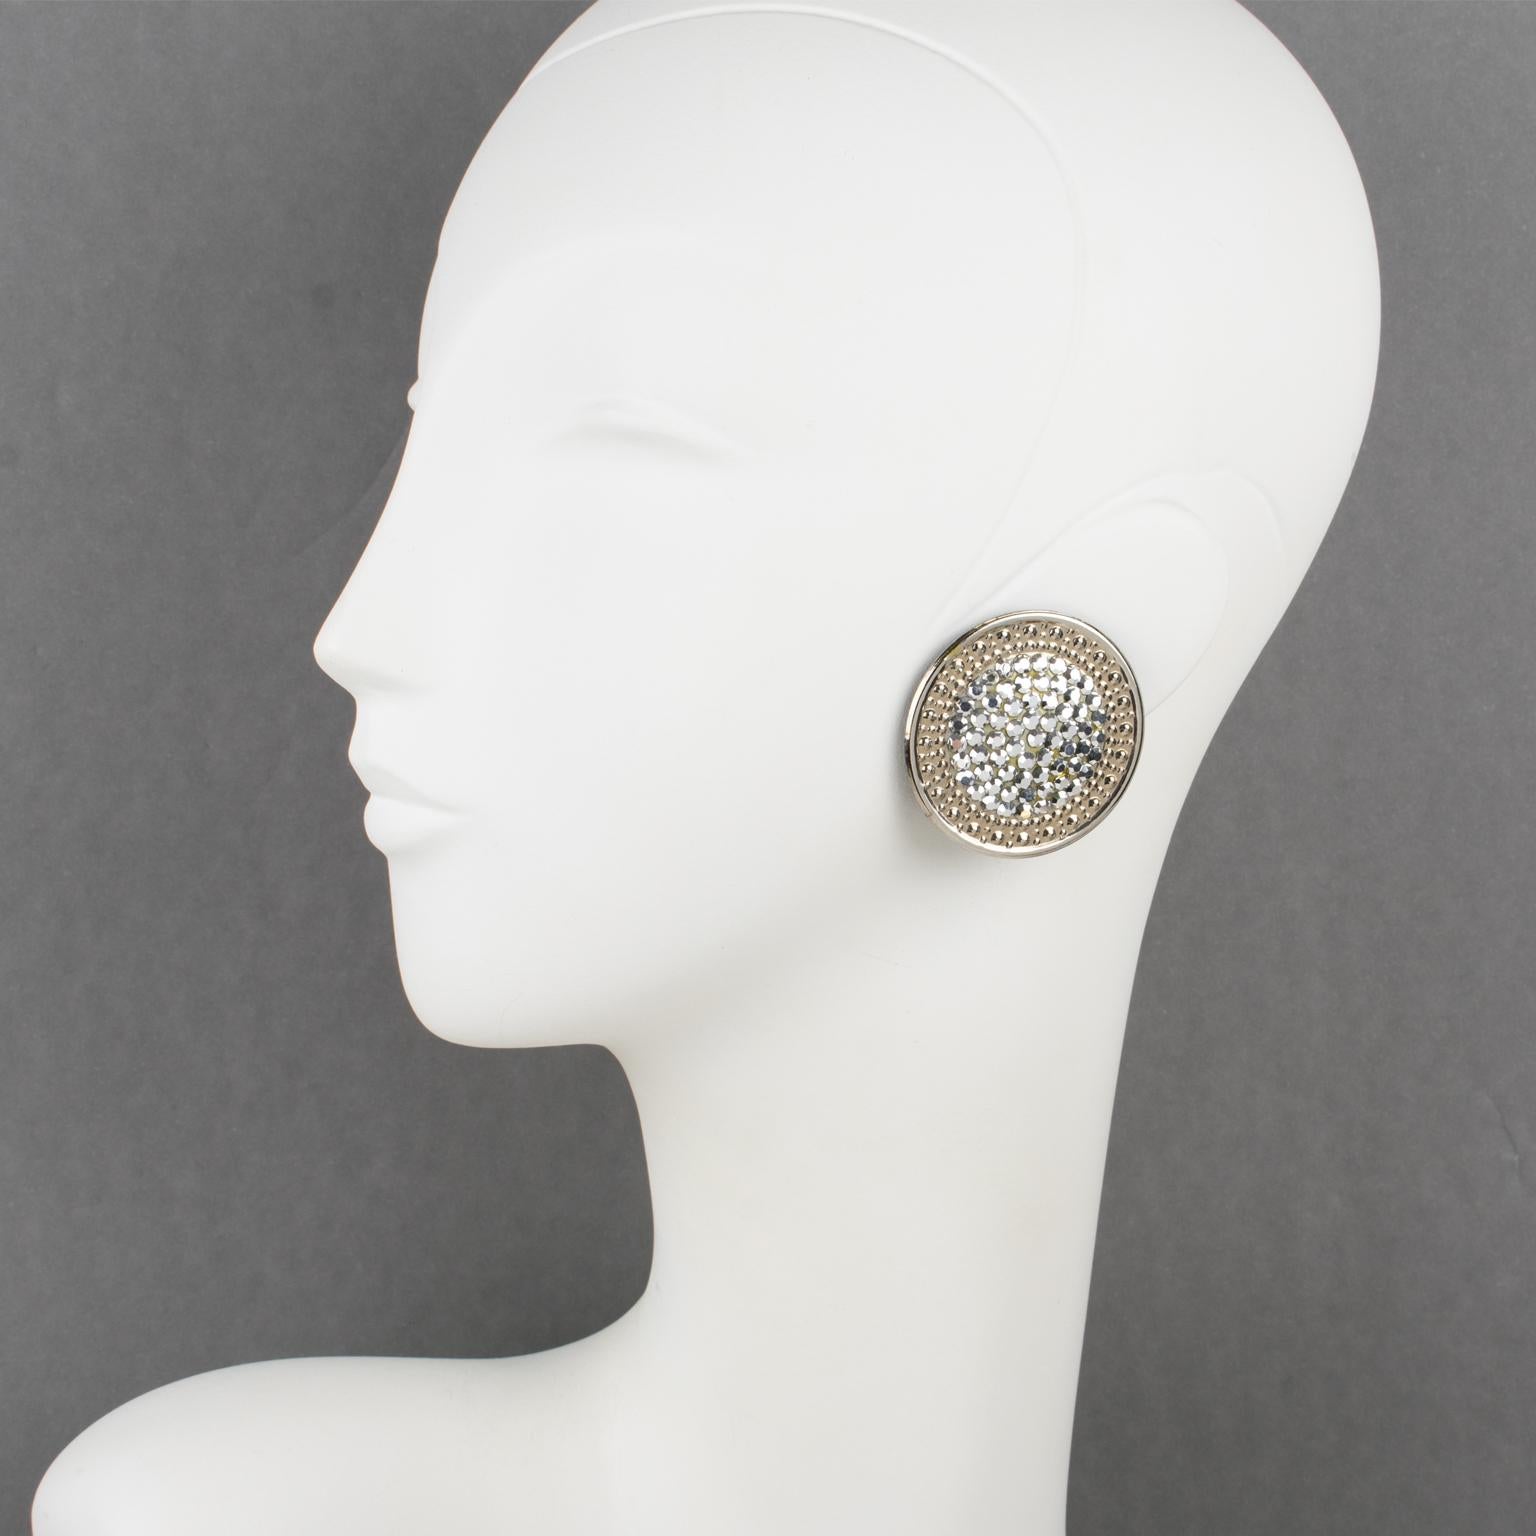 Impressive statement clip-on earrings designed by Richard Kerr in the 1980s. They are made of his signature pave rhinestones. These pieces feature a large rounded silvered metal framing with texture, topped with silver crystal rhinestones. Brand tag